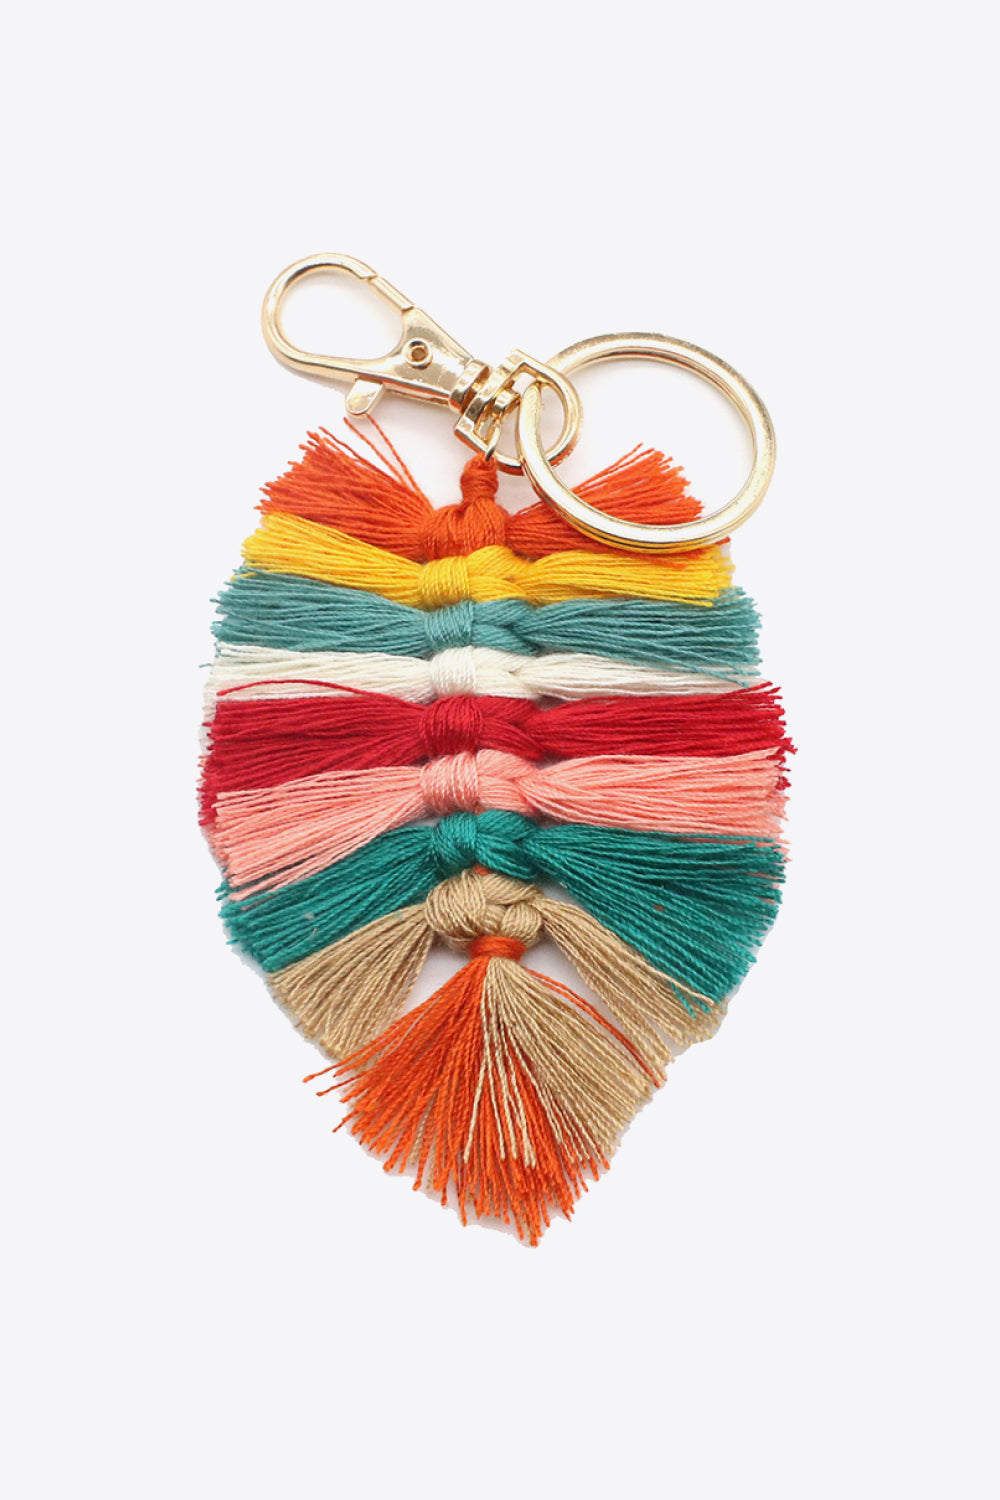 Trendsi Cupid Beauty Supplies Multicolor / One Size Keychains Assorted 4-Pack Leaf Shape Fringe Keychain